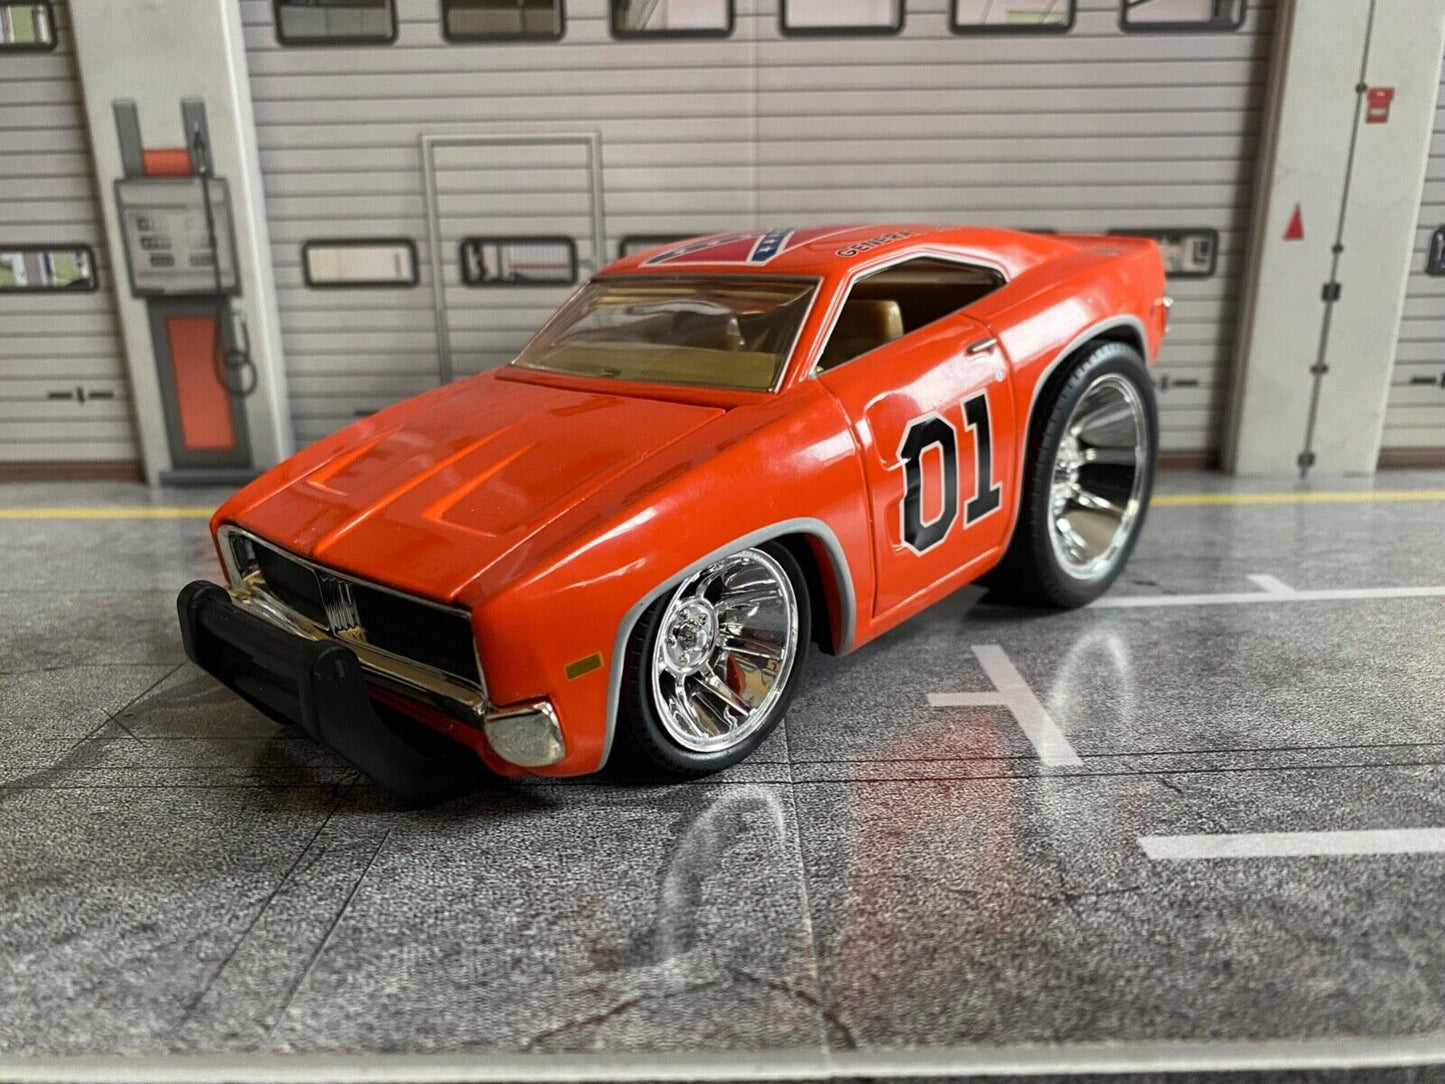 Dodge Charger General Lee The Dukes of Hazzard ERTL Joyride Comic Style 1:24